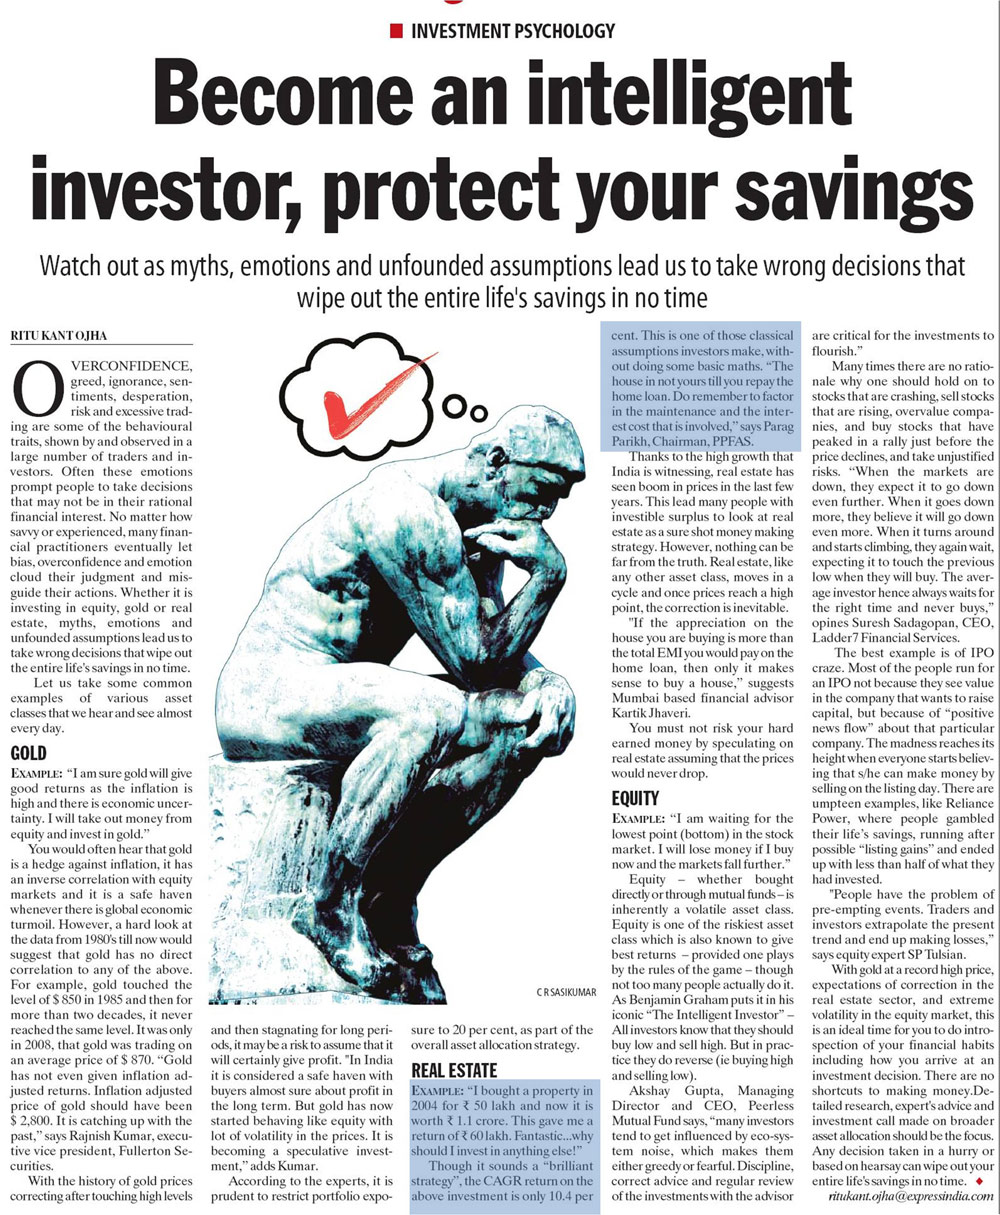 Become an intelligent investor, protect your savings - The Indian Express